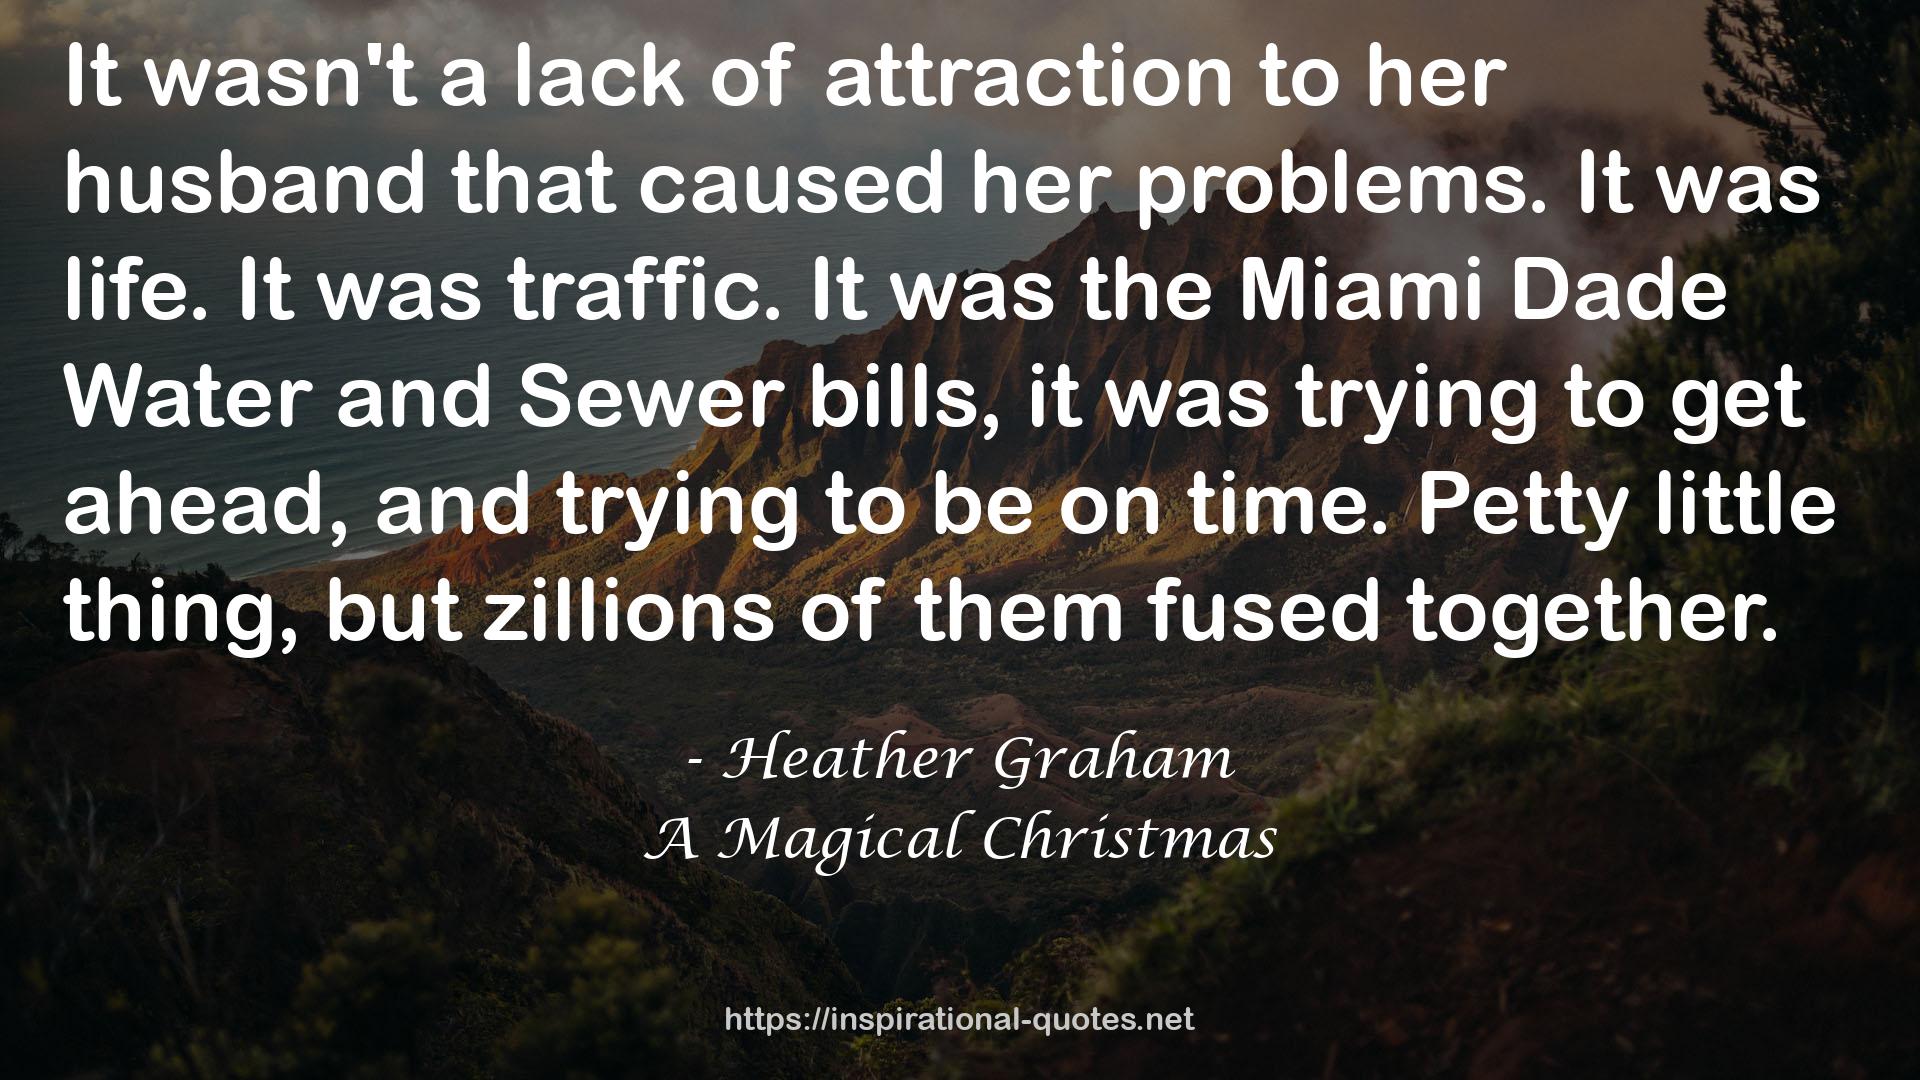 A Magical Christmas QUOTES